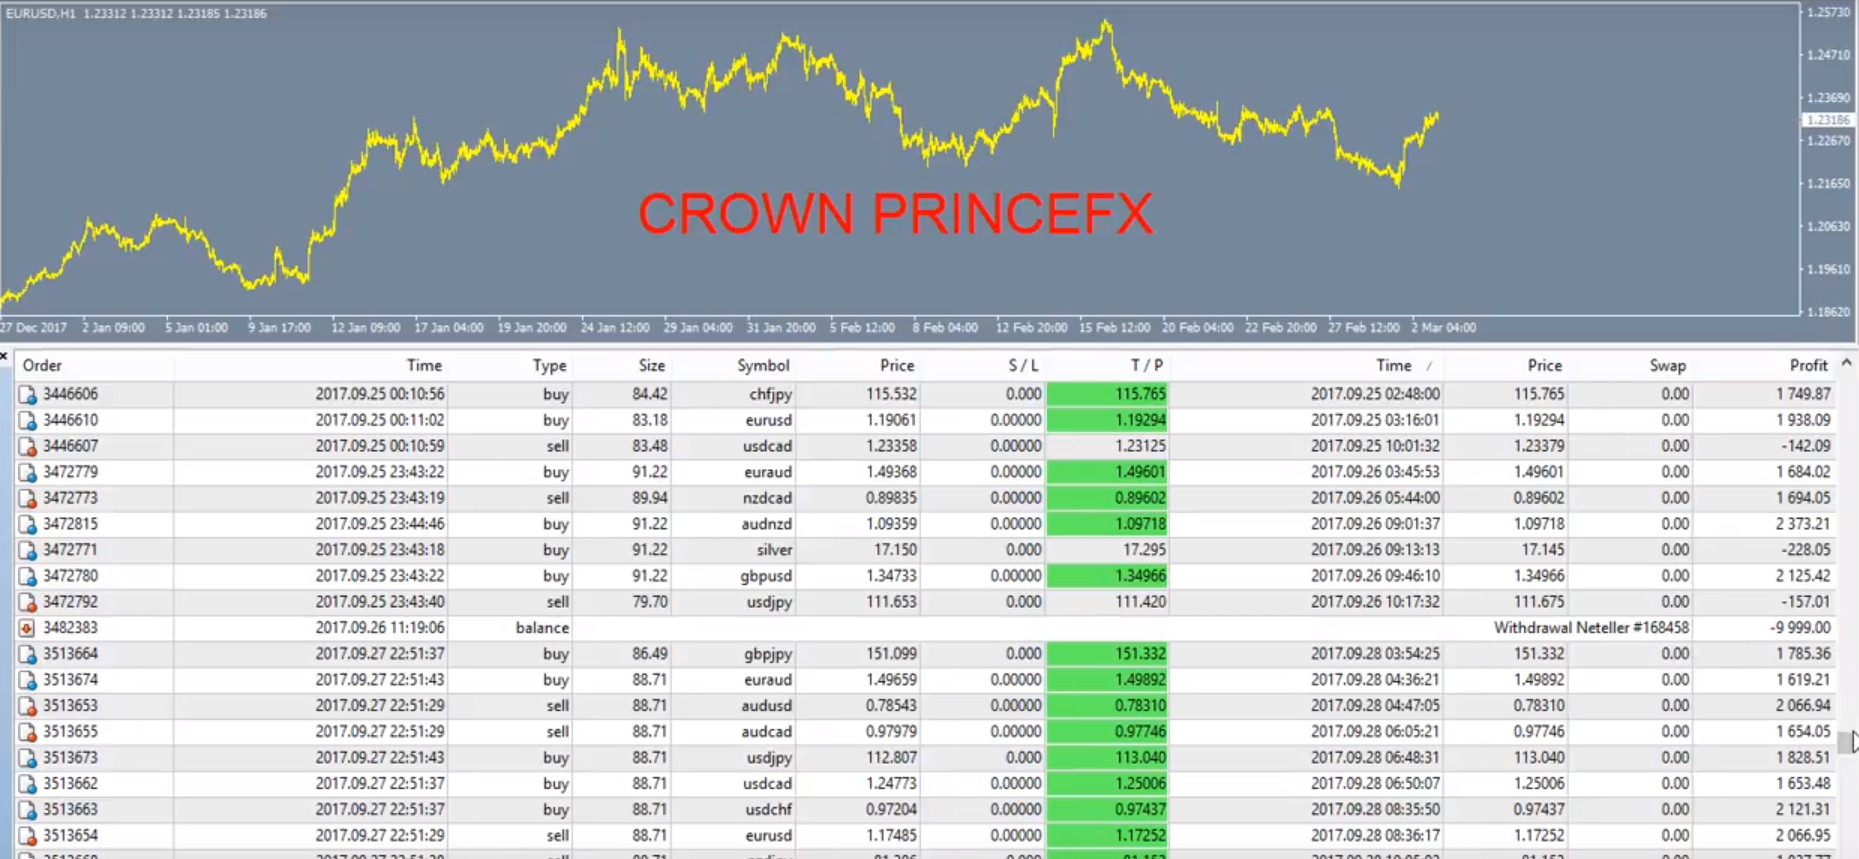 CrownPrinceFX Cost $699 -Good Profit – Download Free